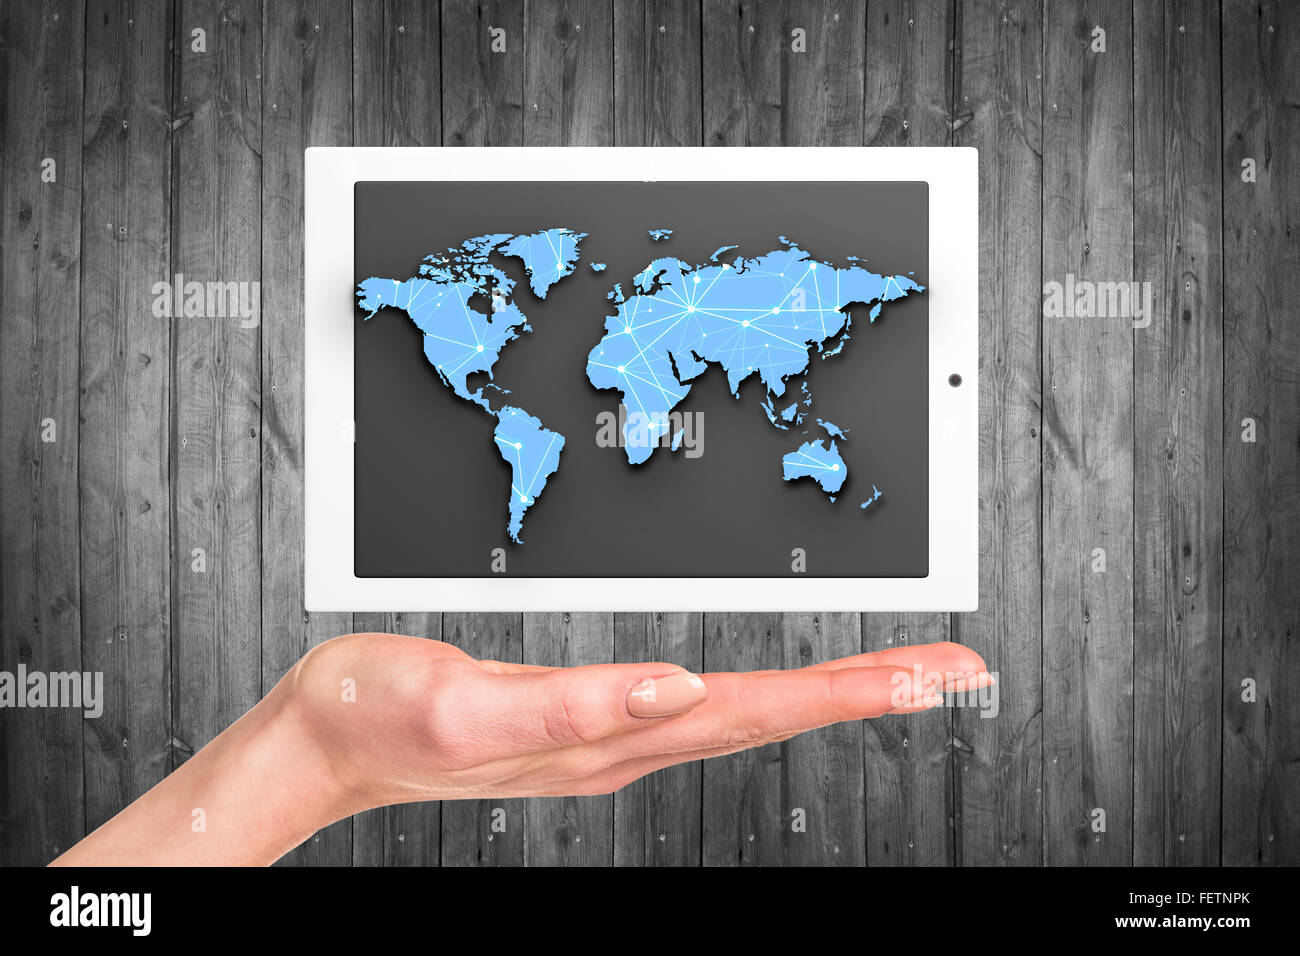 Tablet with world map Stock Photo